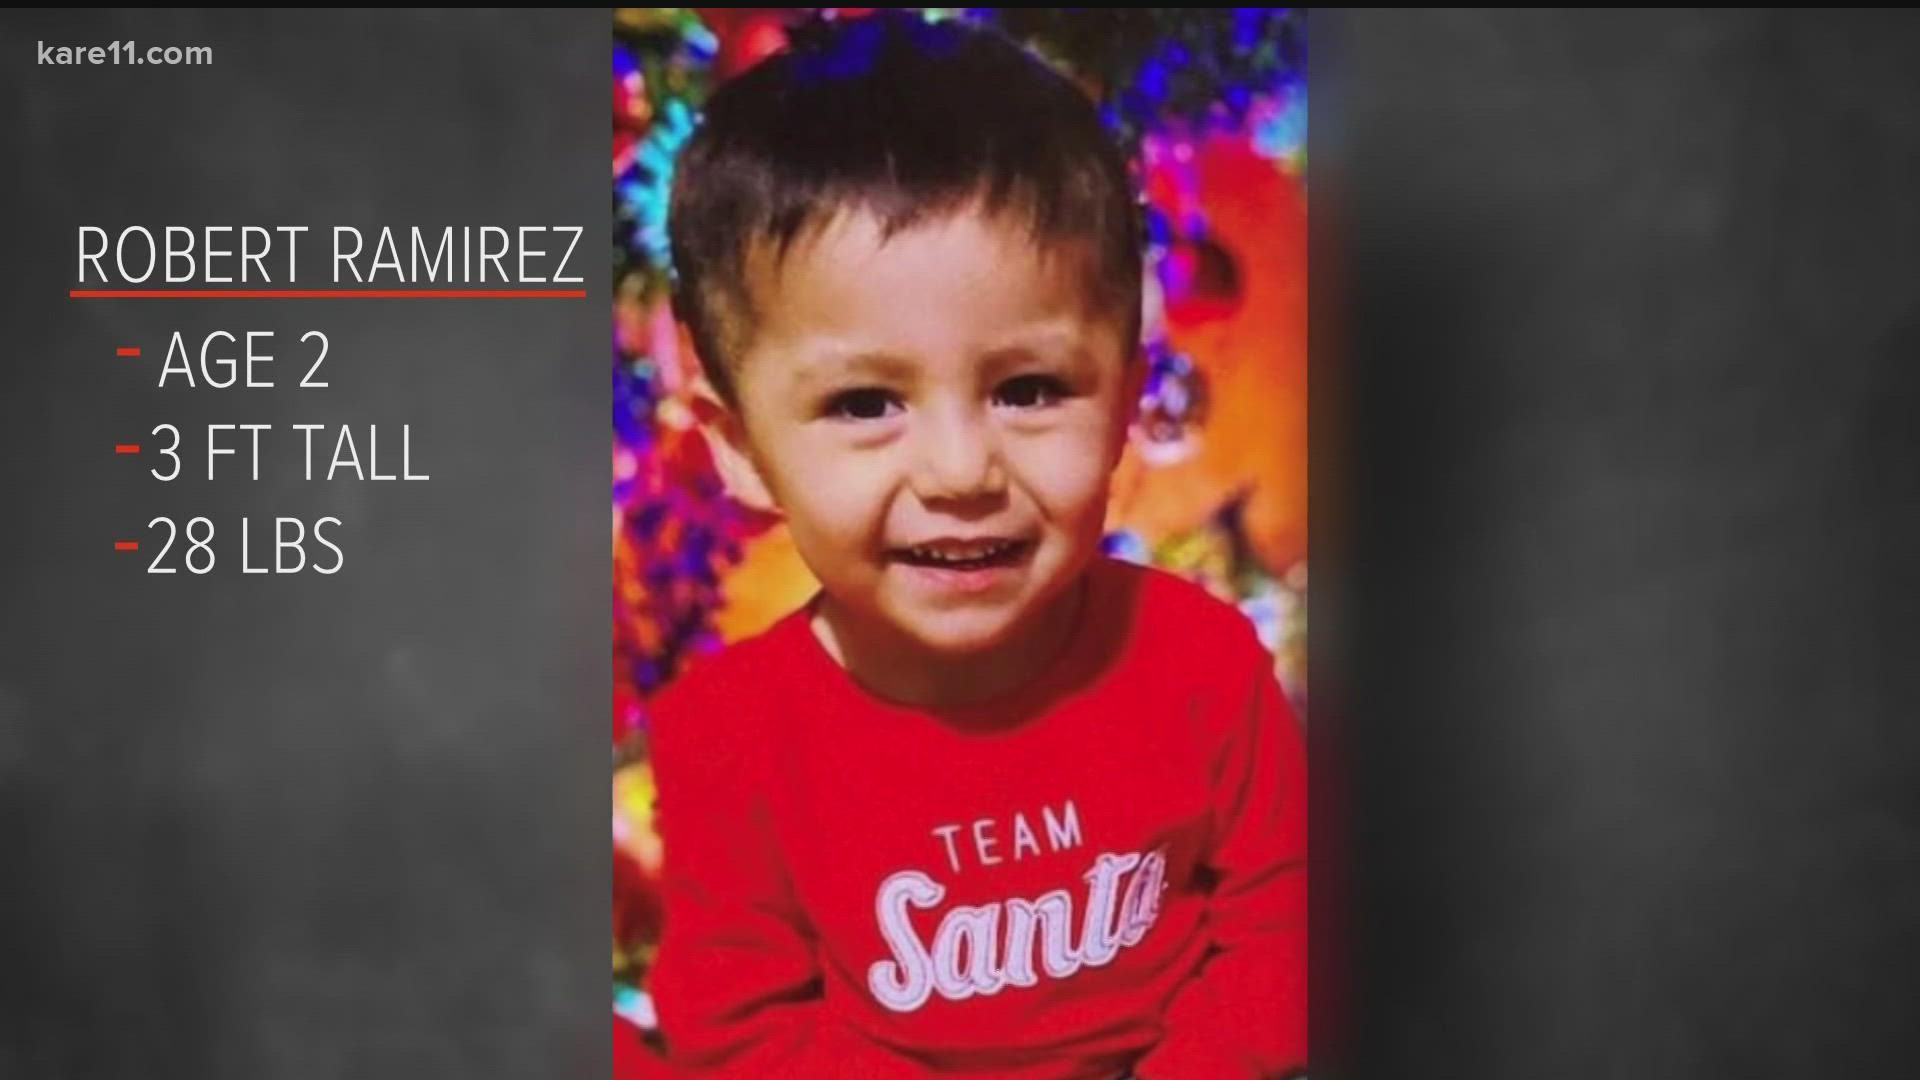 Authorities say Robert Ramirez was last seen wearing a long-sleeved red t-shirt and black sweatpants with green stripes.